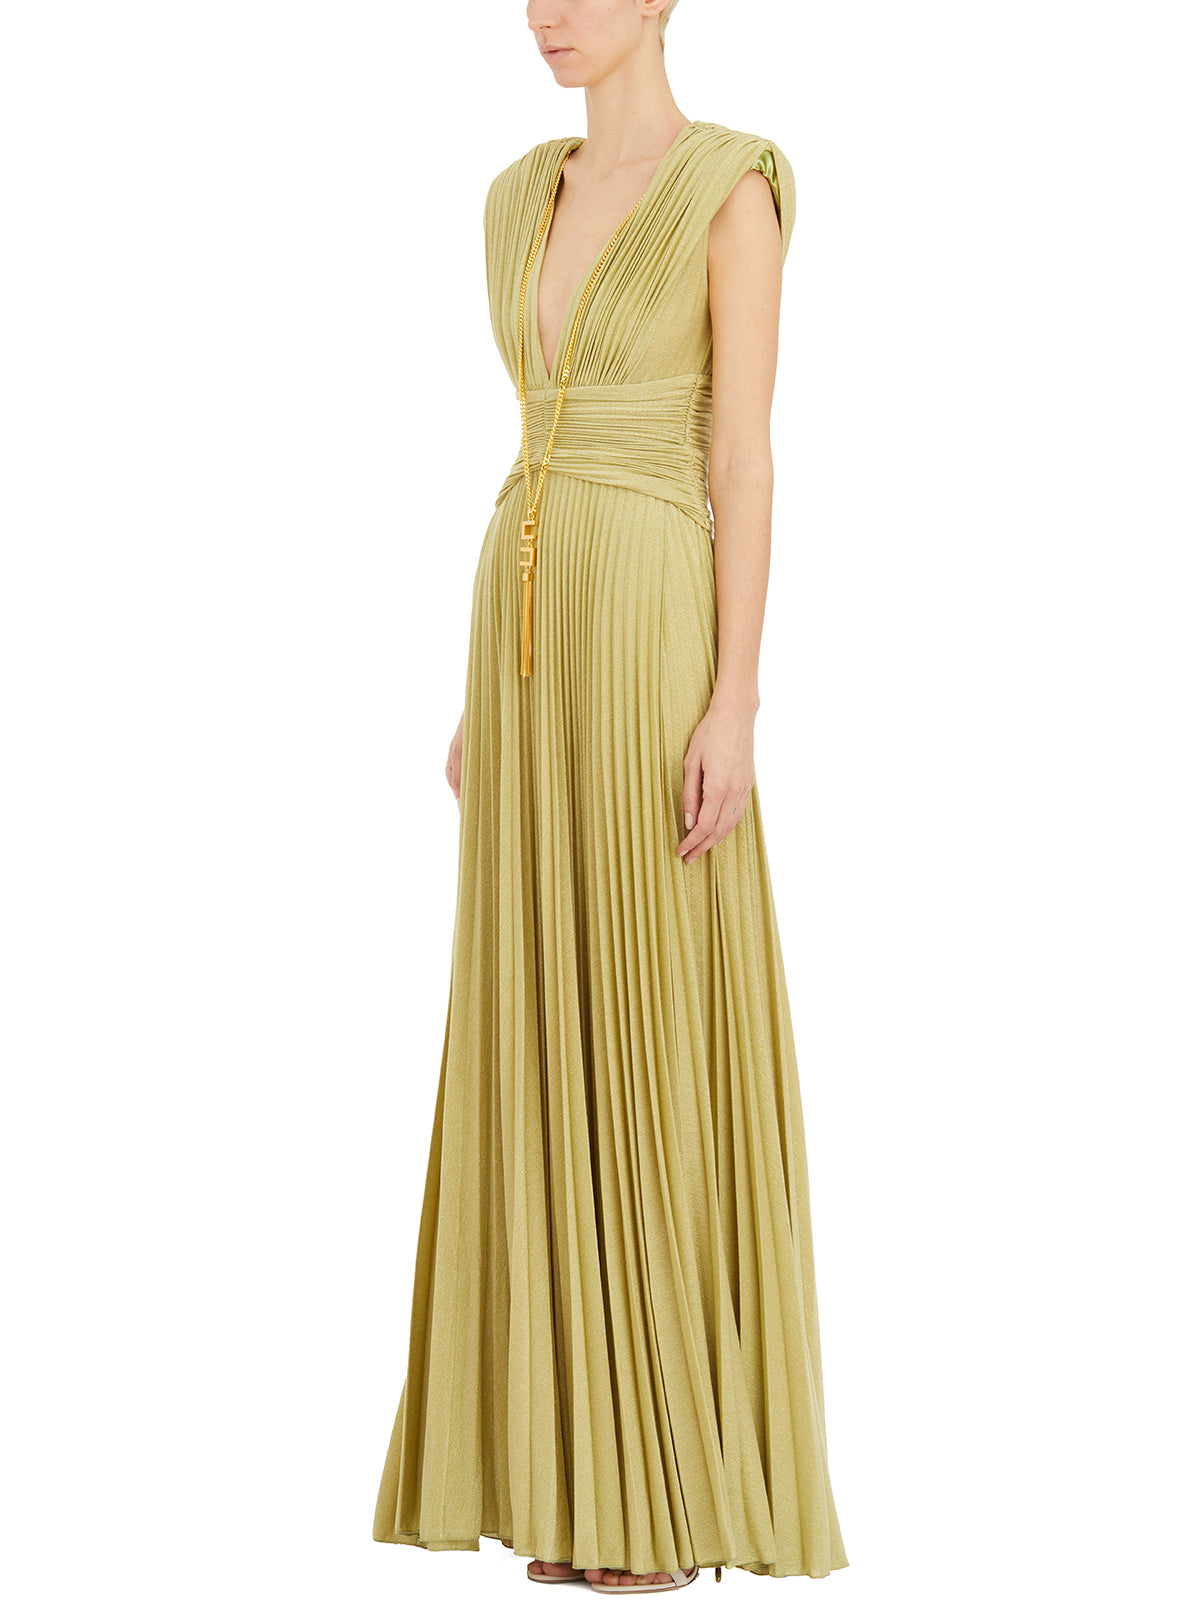 ELISABETTA FRANCHI Green V-Neck Dress with Padded Straps and Metallic Accessory for Women